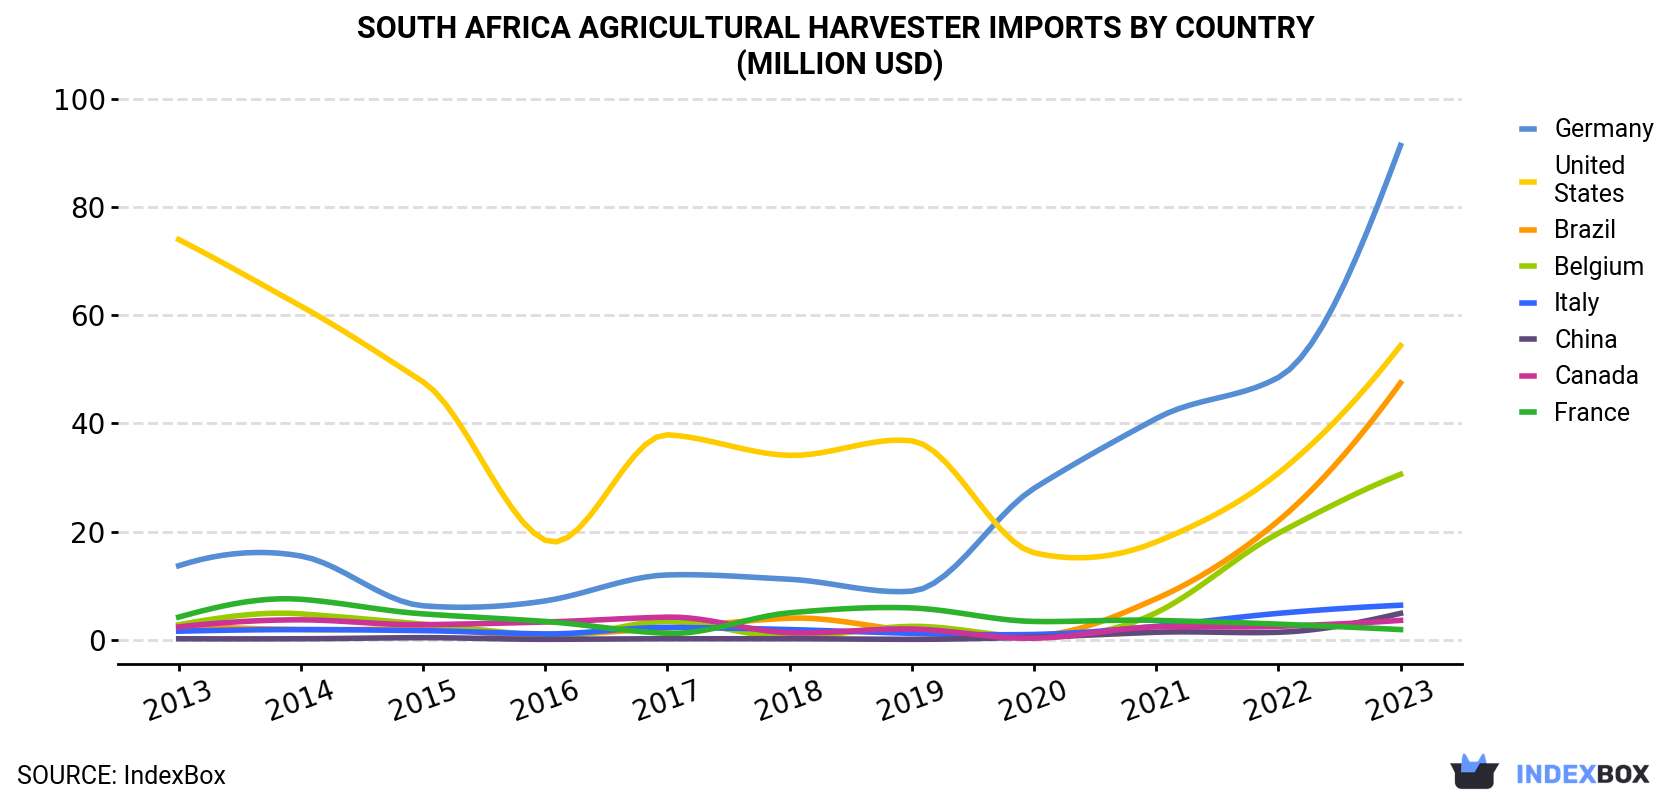 South Africa Agricultural Harvester Imports By Country (Million USD)